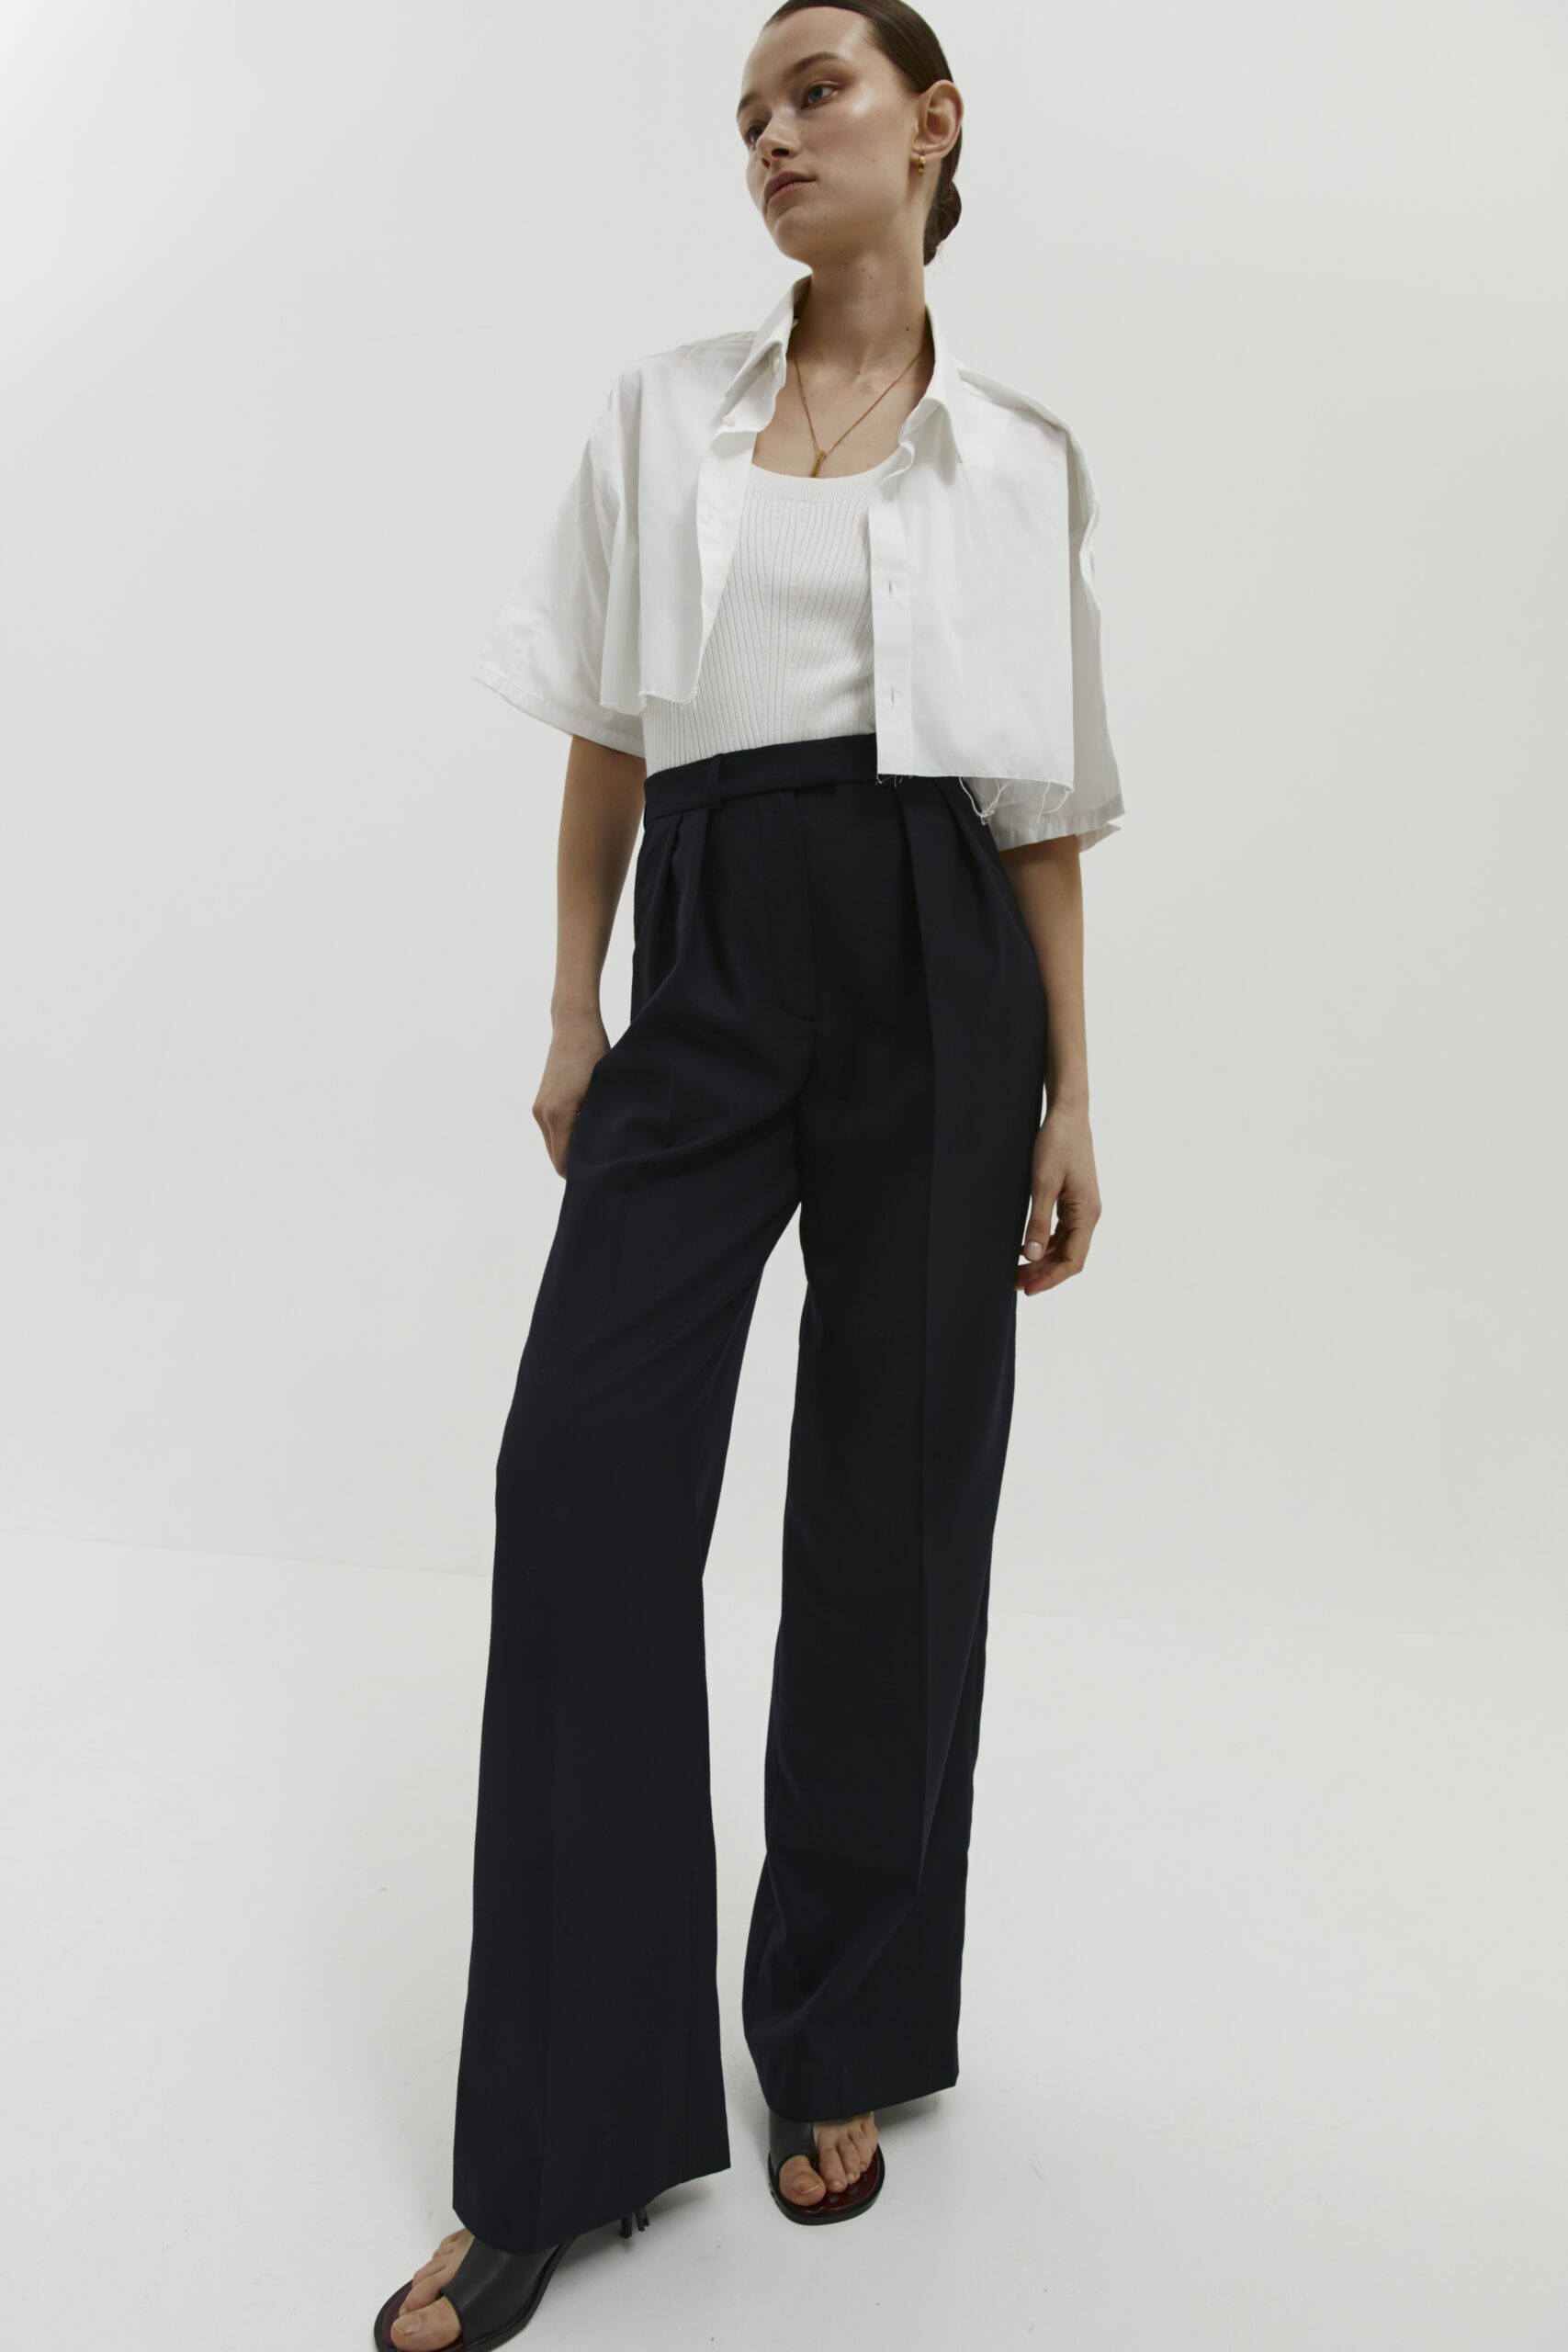 Straight Lines Trousers - Brighton